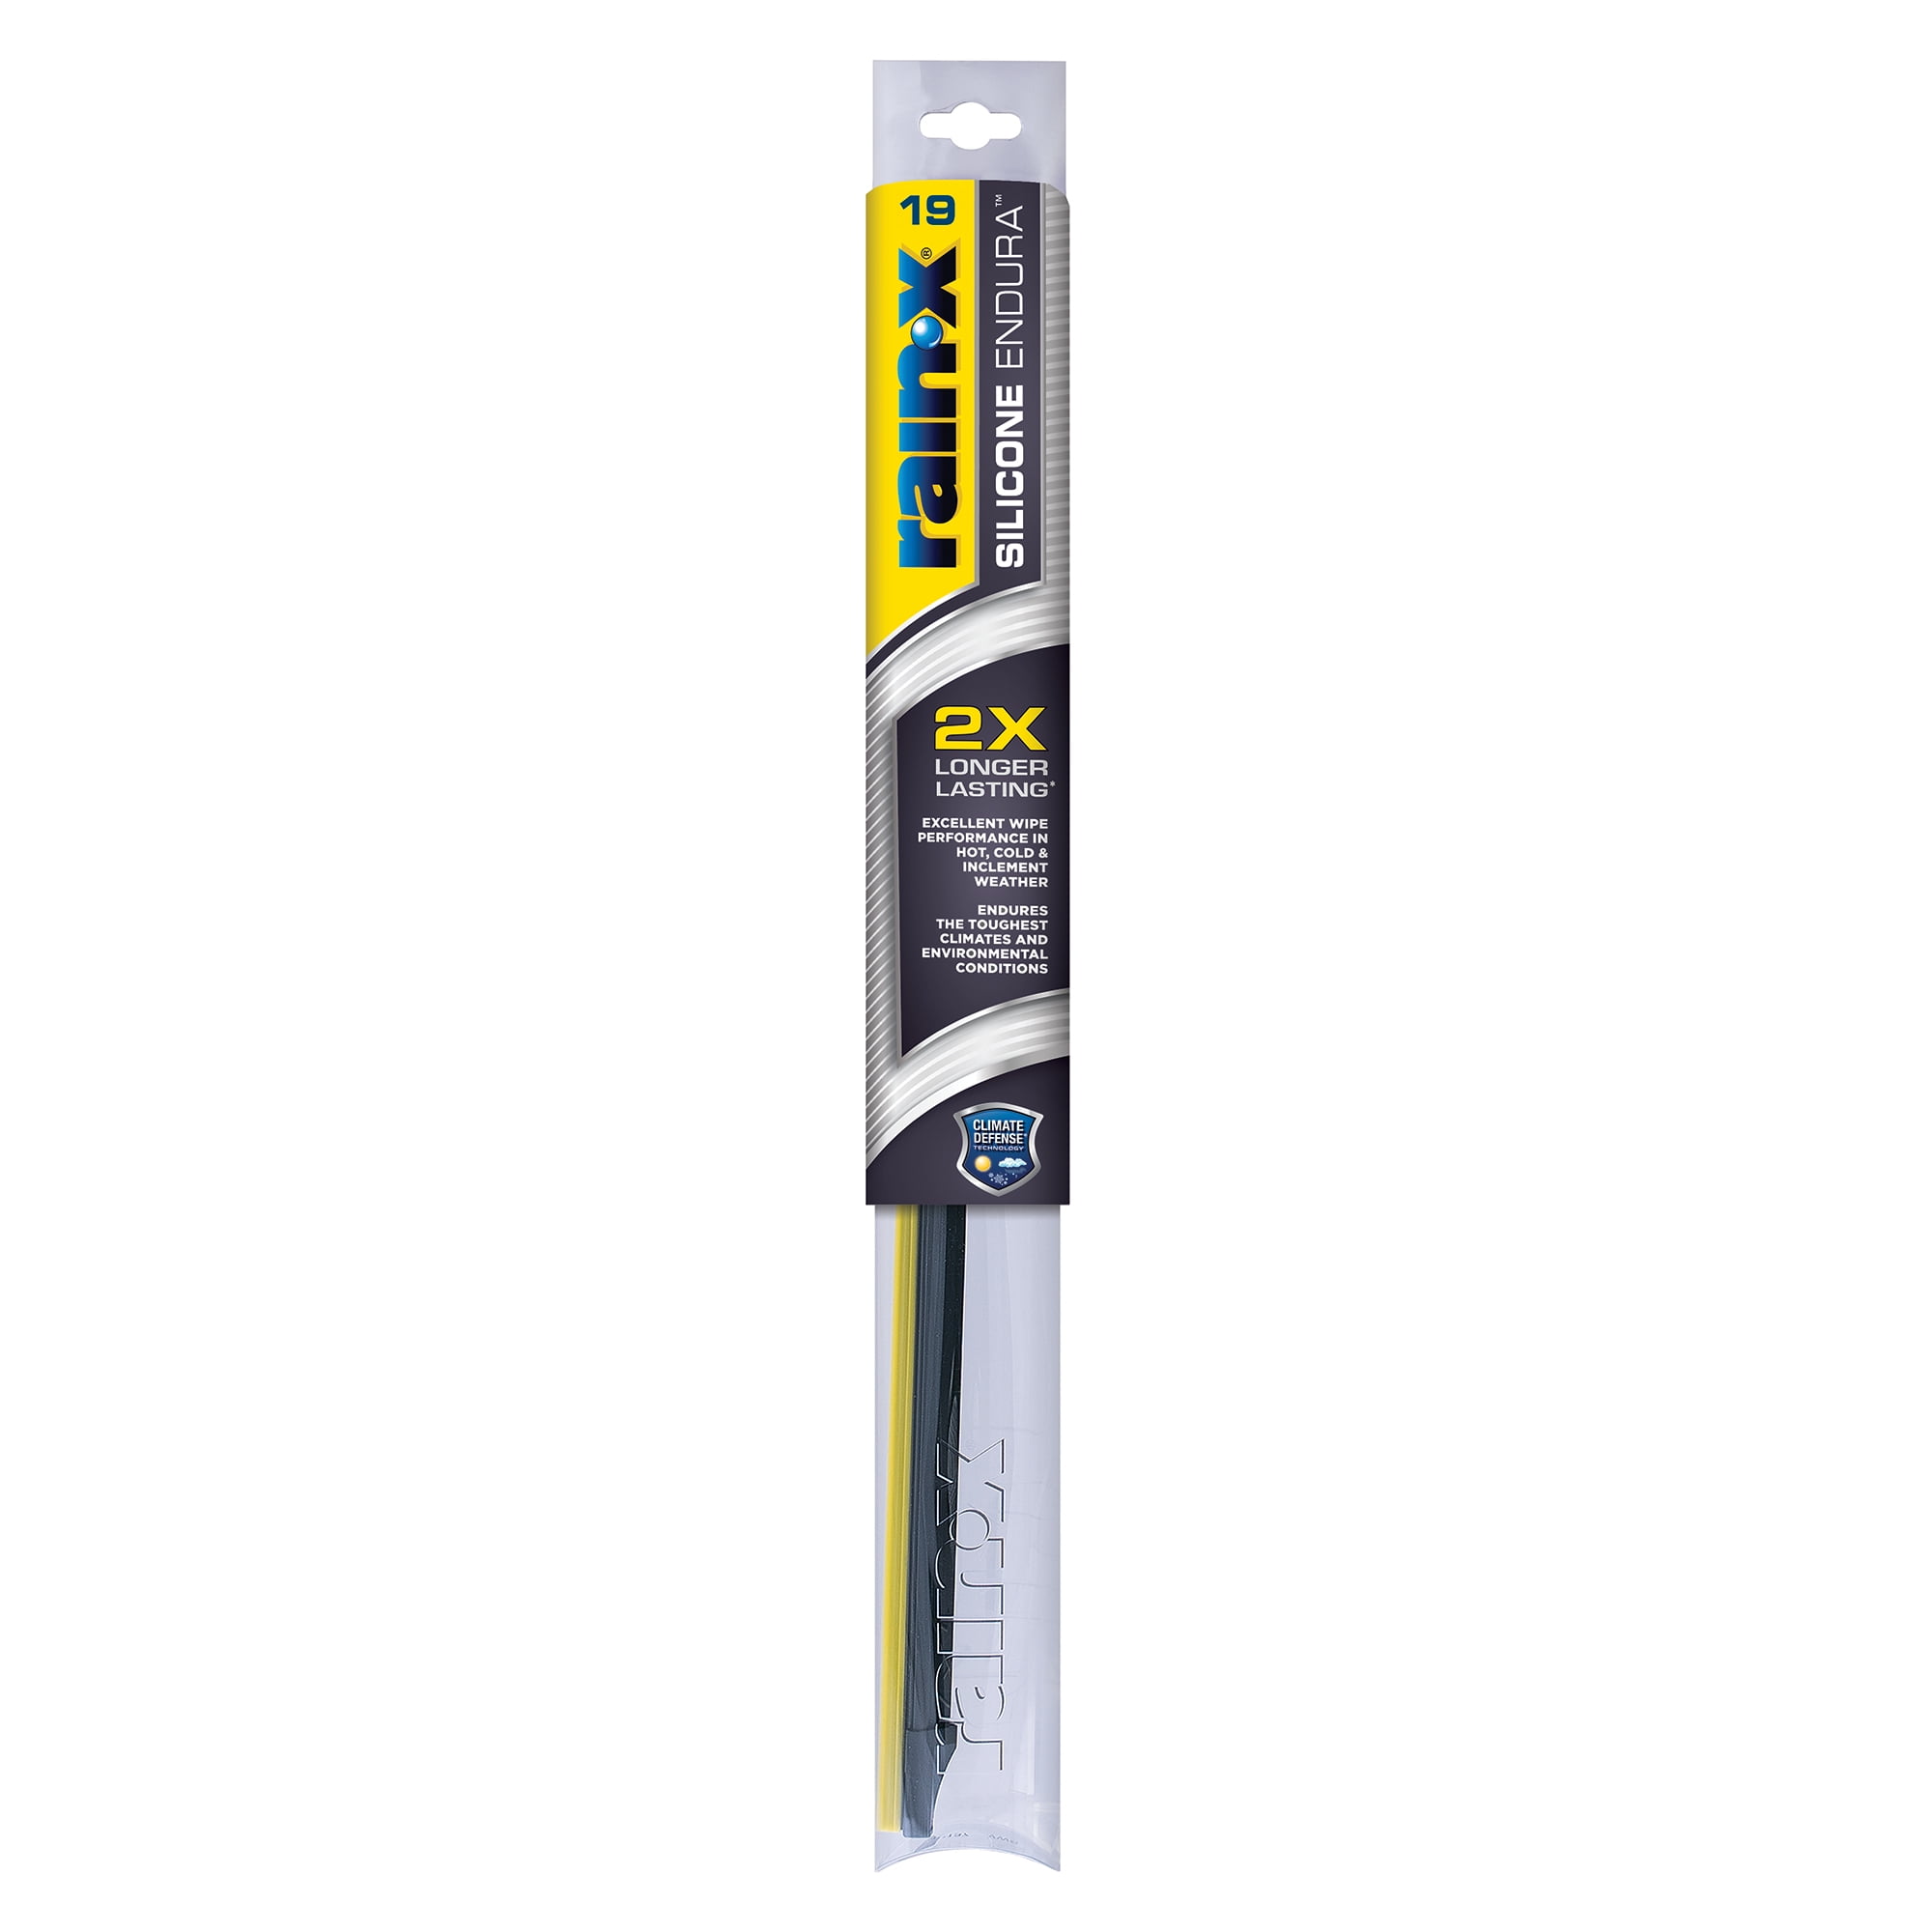 Water-Repellent Pack of 2 All-Weather Quiet and Long-Lasting AVA 19+19 Silicone Windscreen Wipers 